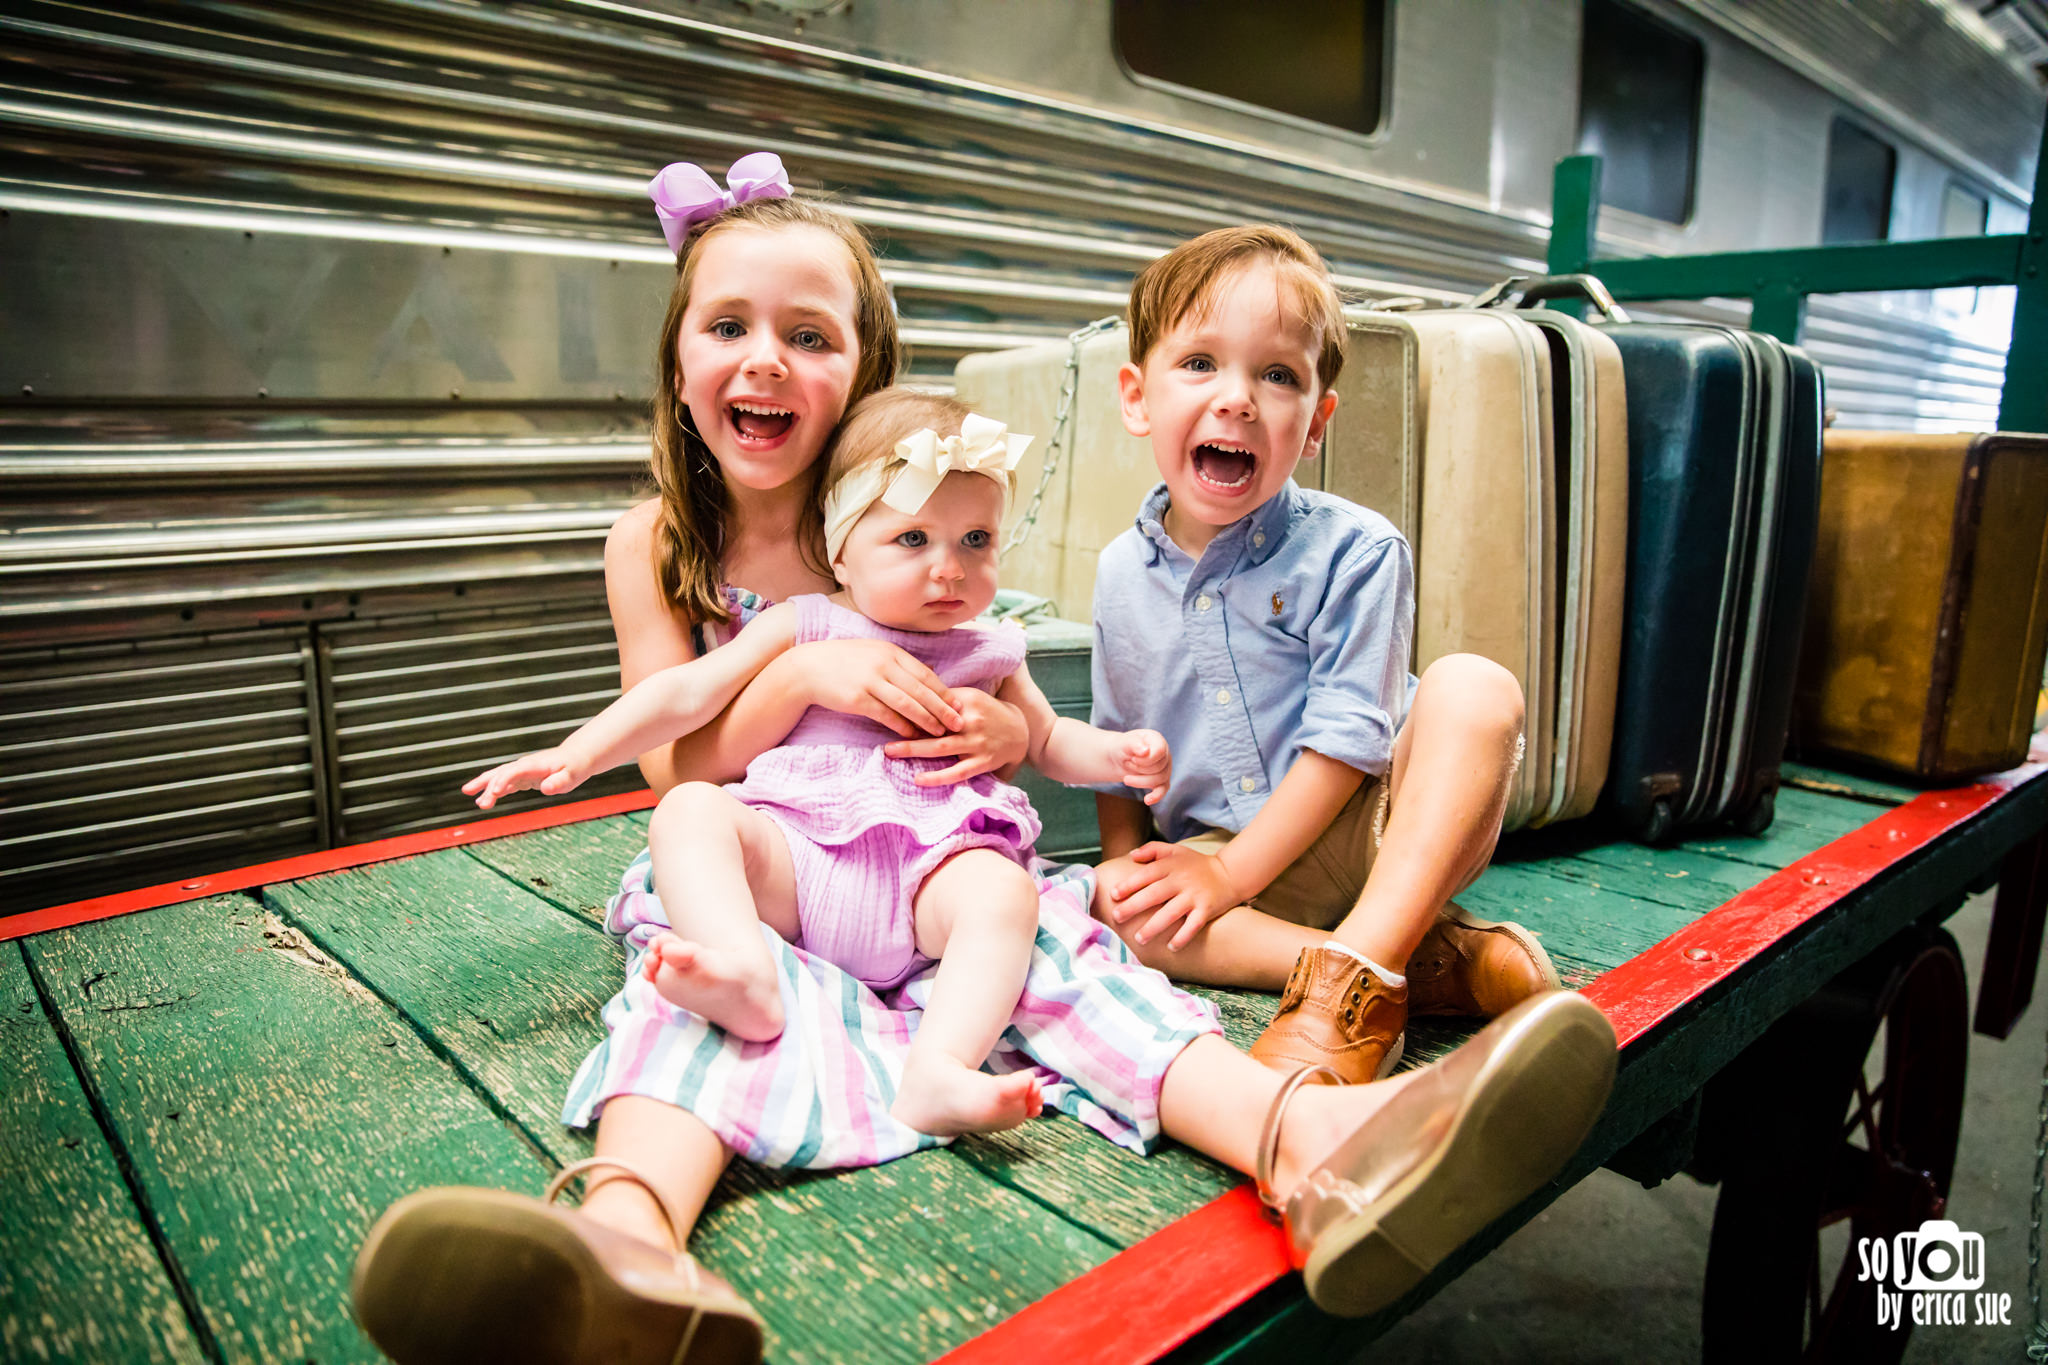 so-you-by-erica-sue-gold-coast-railroad-museum-miami-family-photo-shoot-session-7255.JPG